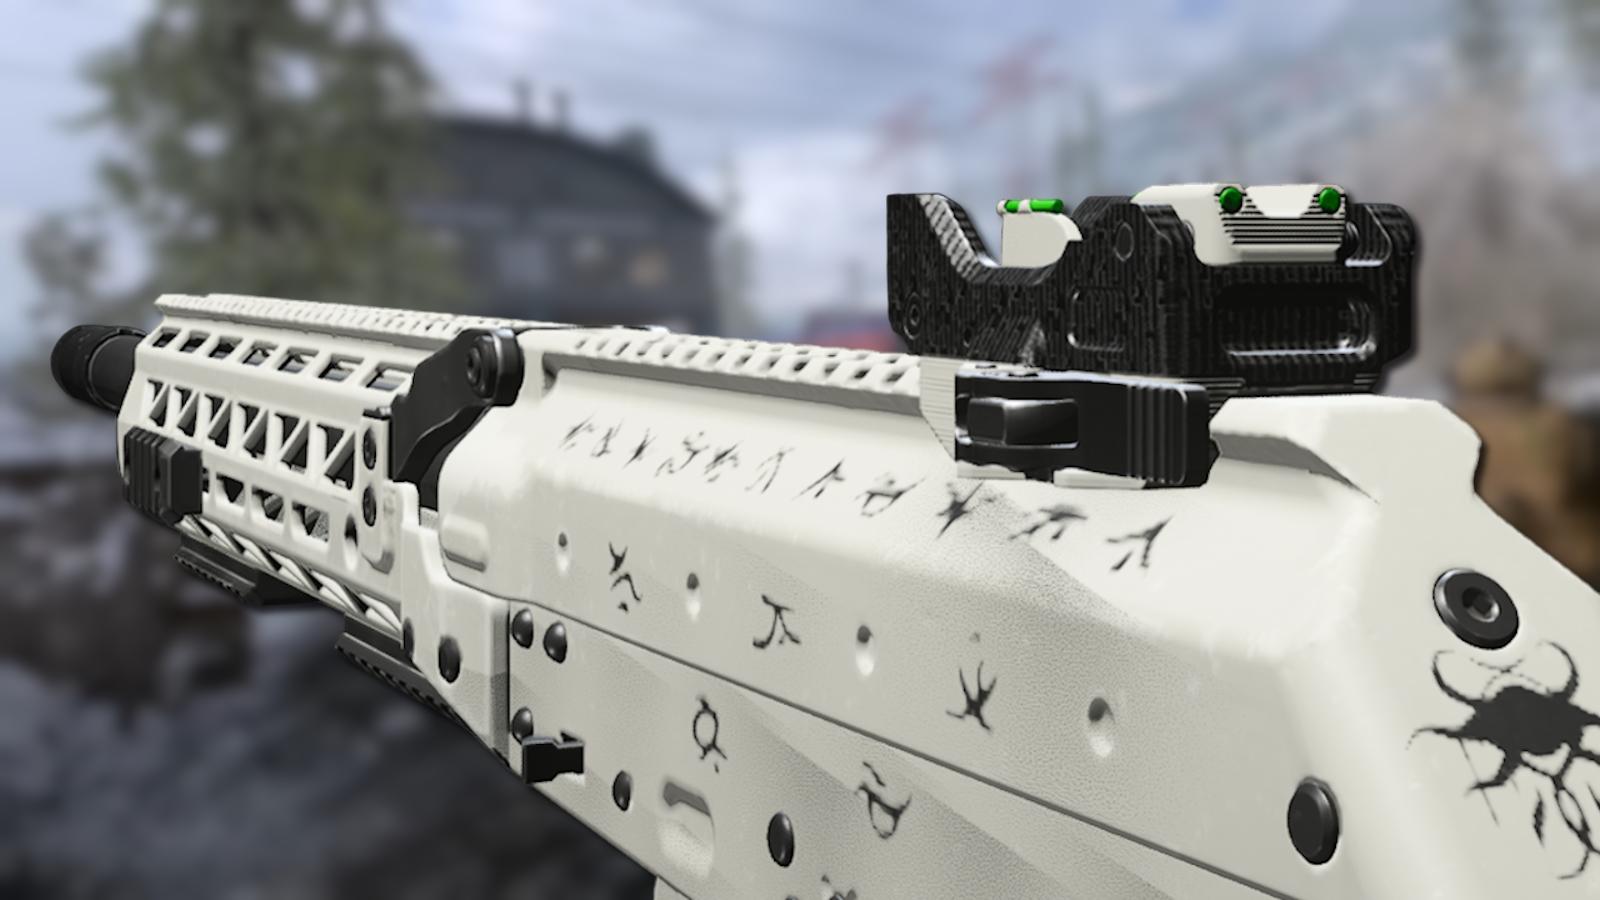 Jak Bullseye aftermarket part equipped to Longbow sniper rifle in MW3.